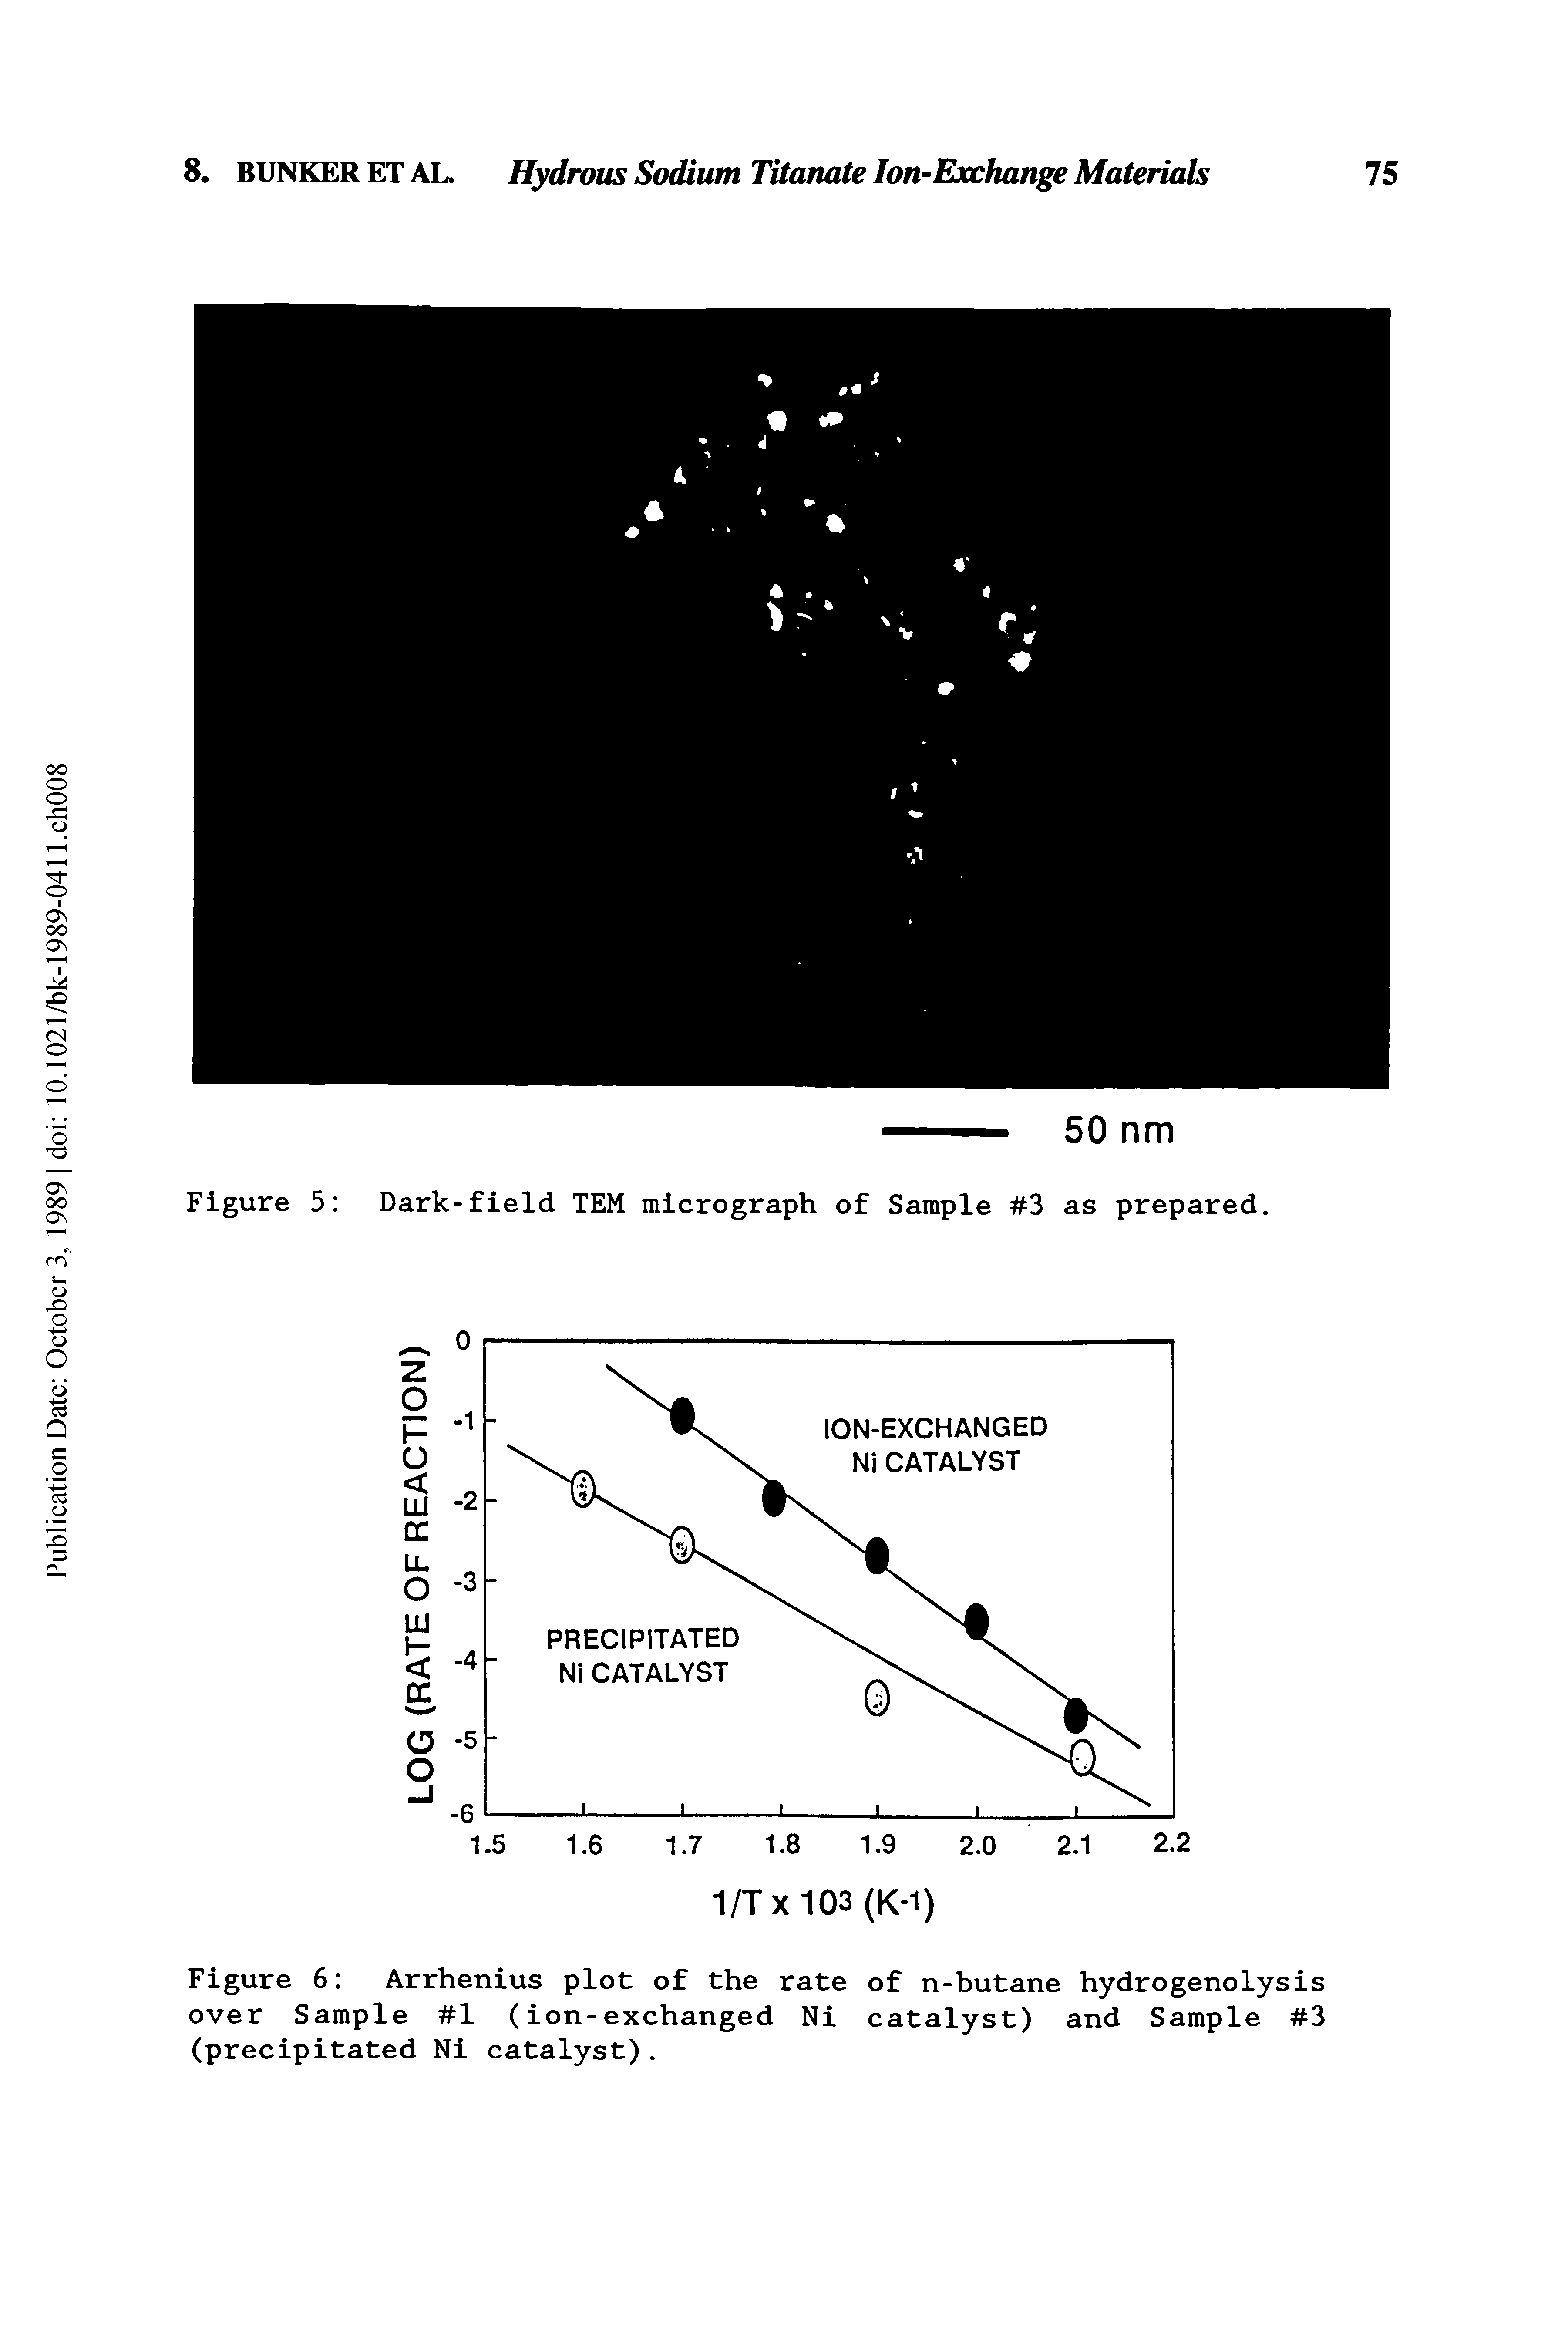 Figure 6 Arrhenius plot of the rate of n-butane hydrogenolysis over Sample 1 (ion-exchanged Ni catalyst) and Sample 3 (precipitated Ni catalyst).